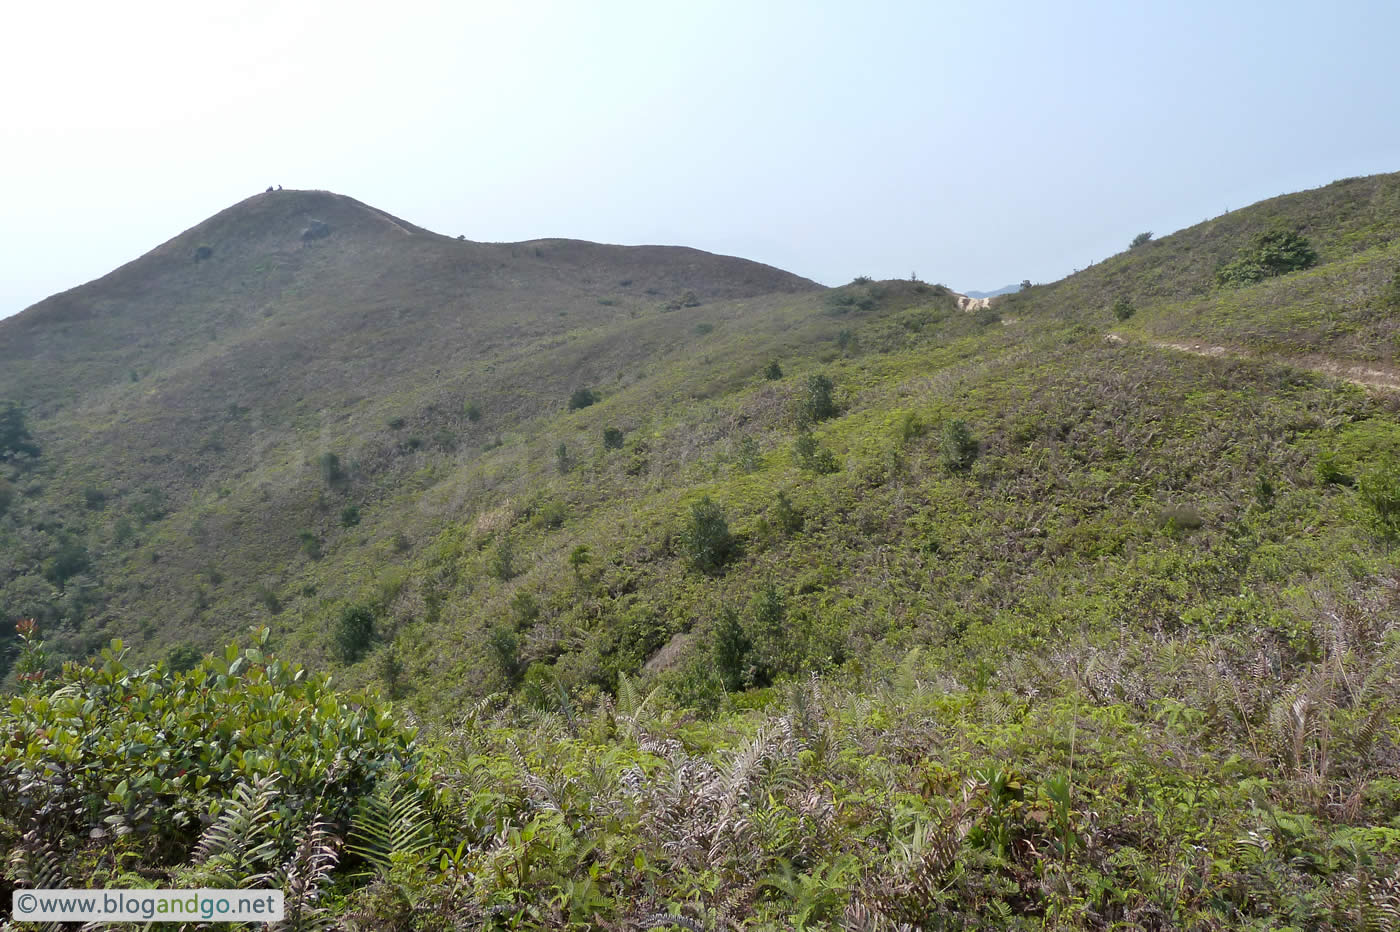 Maclehose Trail 3 - Walking the mountain crest